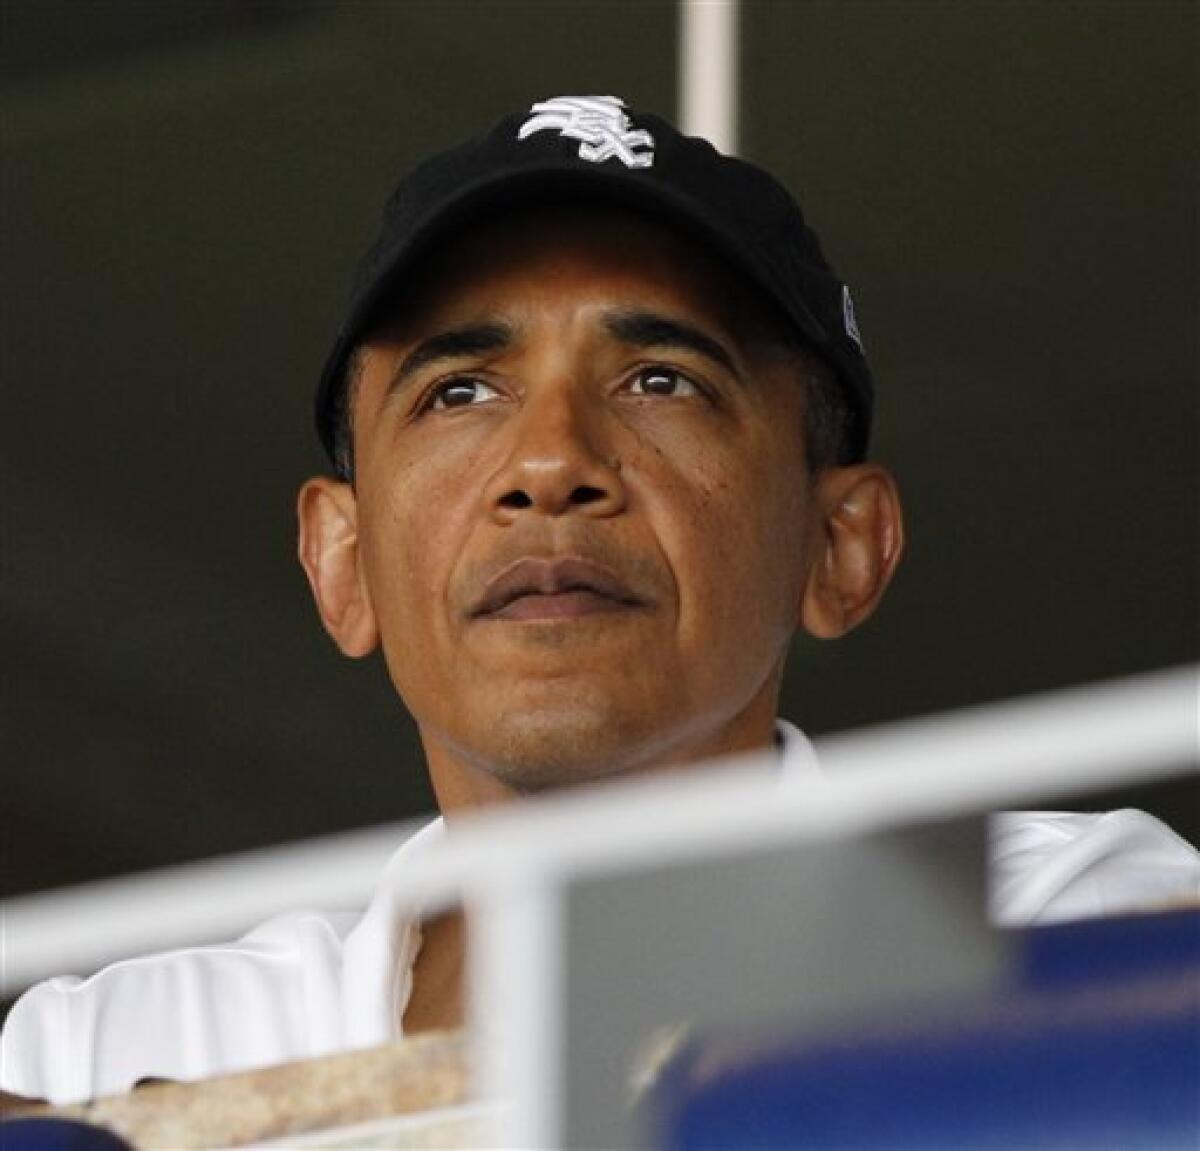 President Barack Obama attends an interleague baseball game between the Chicago White Sox and the Washington Nationals, Friday, June 18, 2010 in Washington.(AP Photo/Pablo Martinez Monsivais)